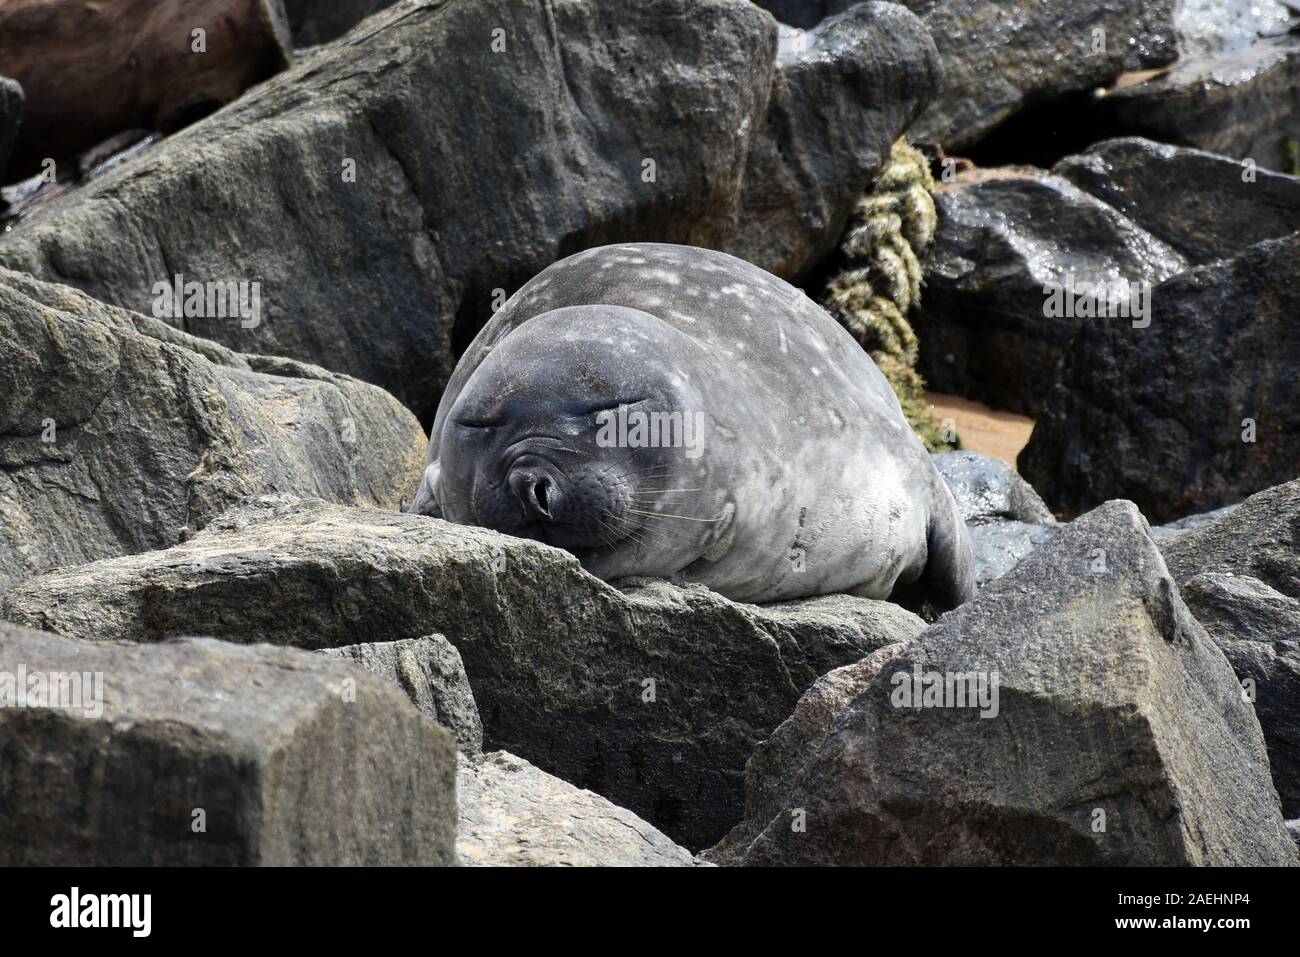 Colombo, Sri Lanka. 9th Dec 2019. A southern elephant seal is seen in the  coastal area of capital Colombo in Sri Lanka, Dec. 9, 2019. A southern elephant  seal was spotted for